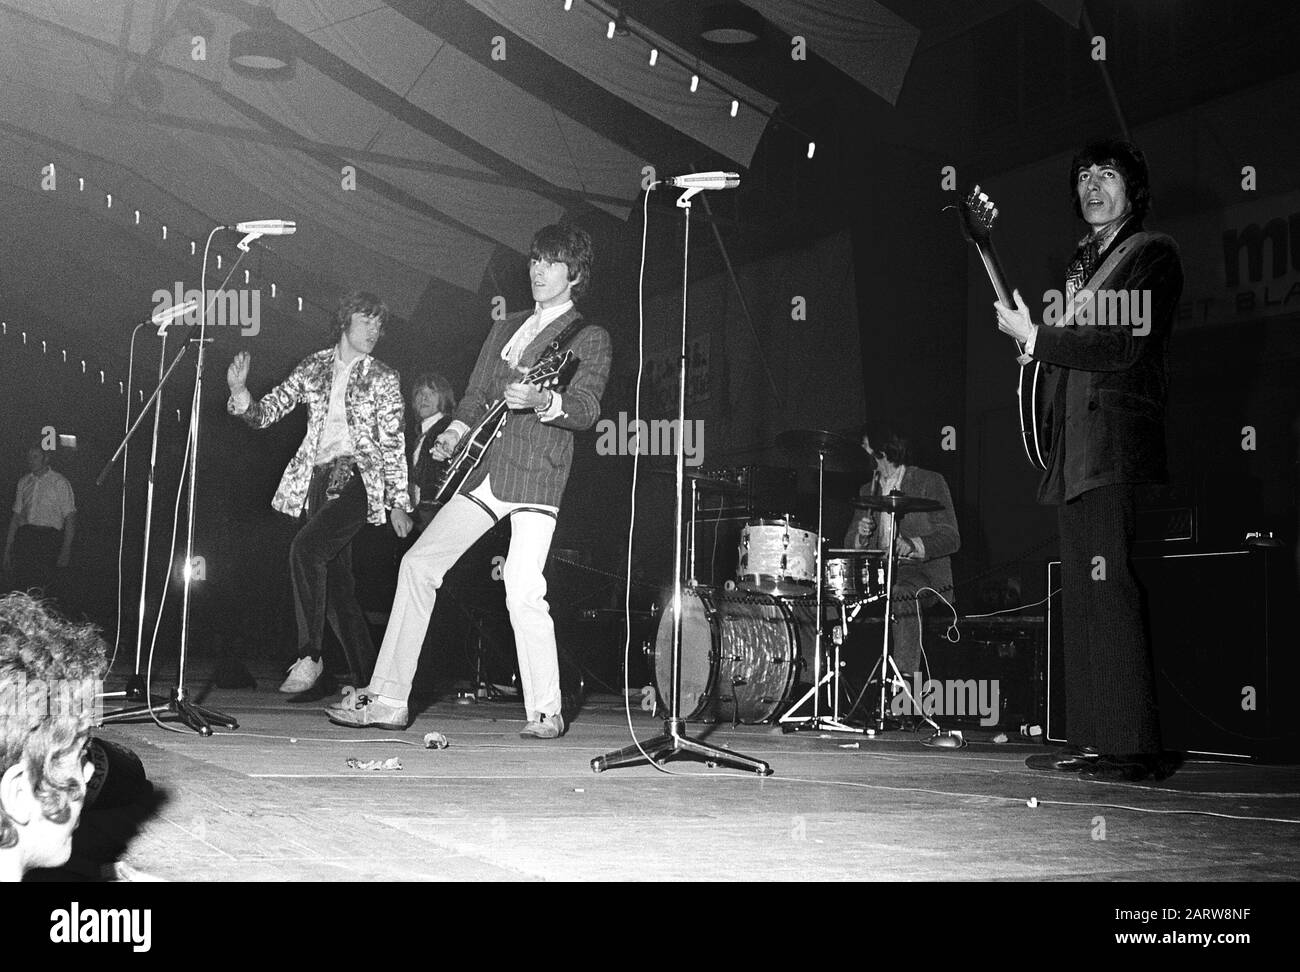 Rolling Stones in concert, Houtrusthallen in The Hague (NL), 15 April 1967.  This is a cropped and retouched (removed scratches and spots, edited  brightness, sharpened) version of the image from the National